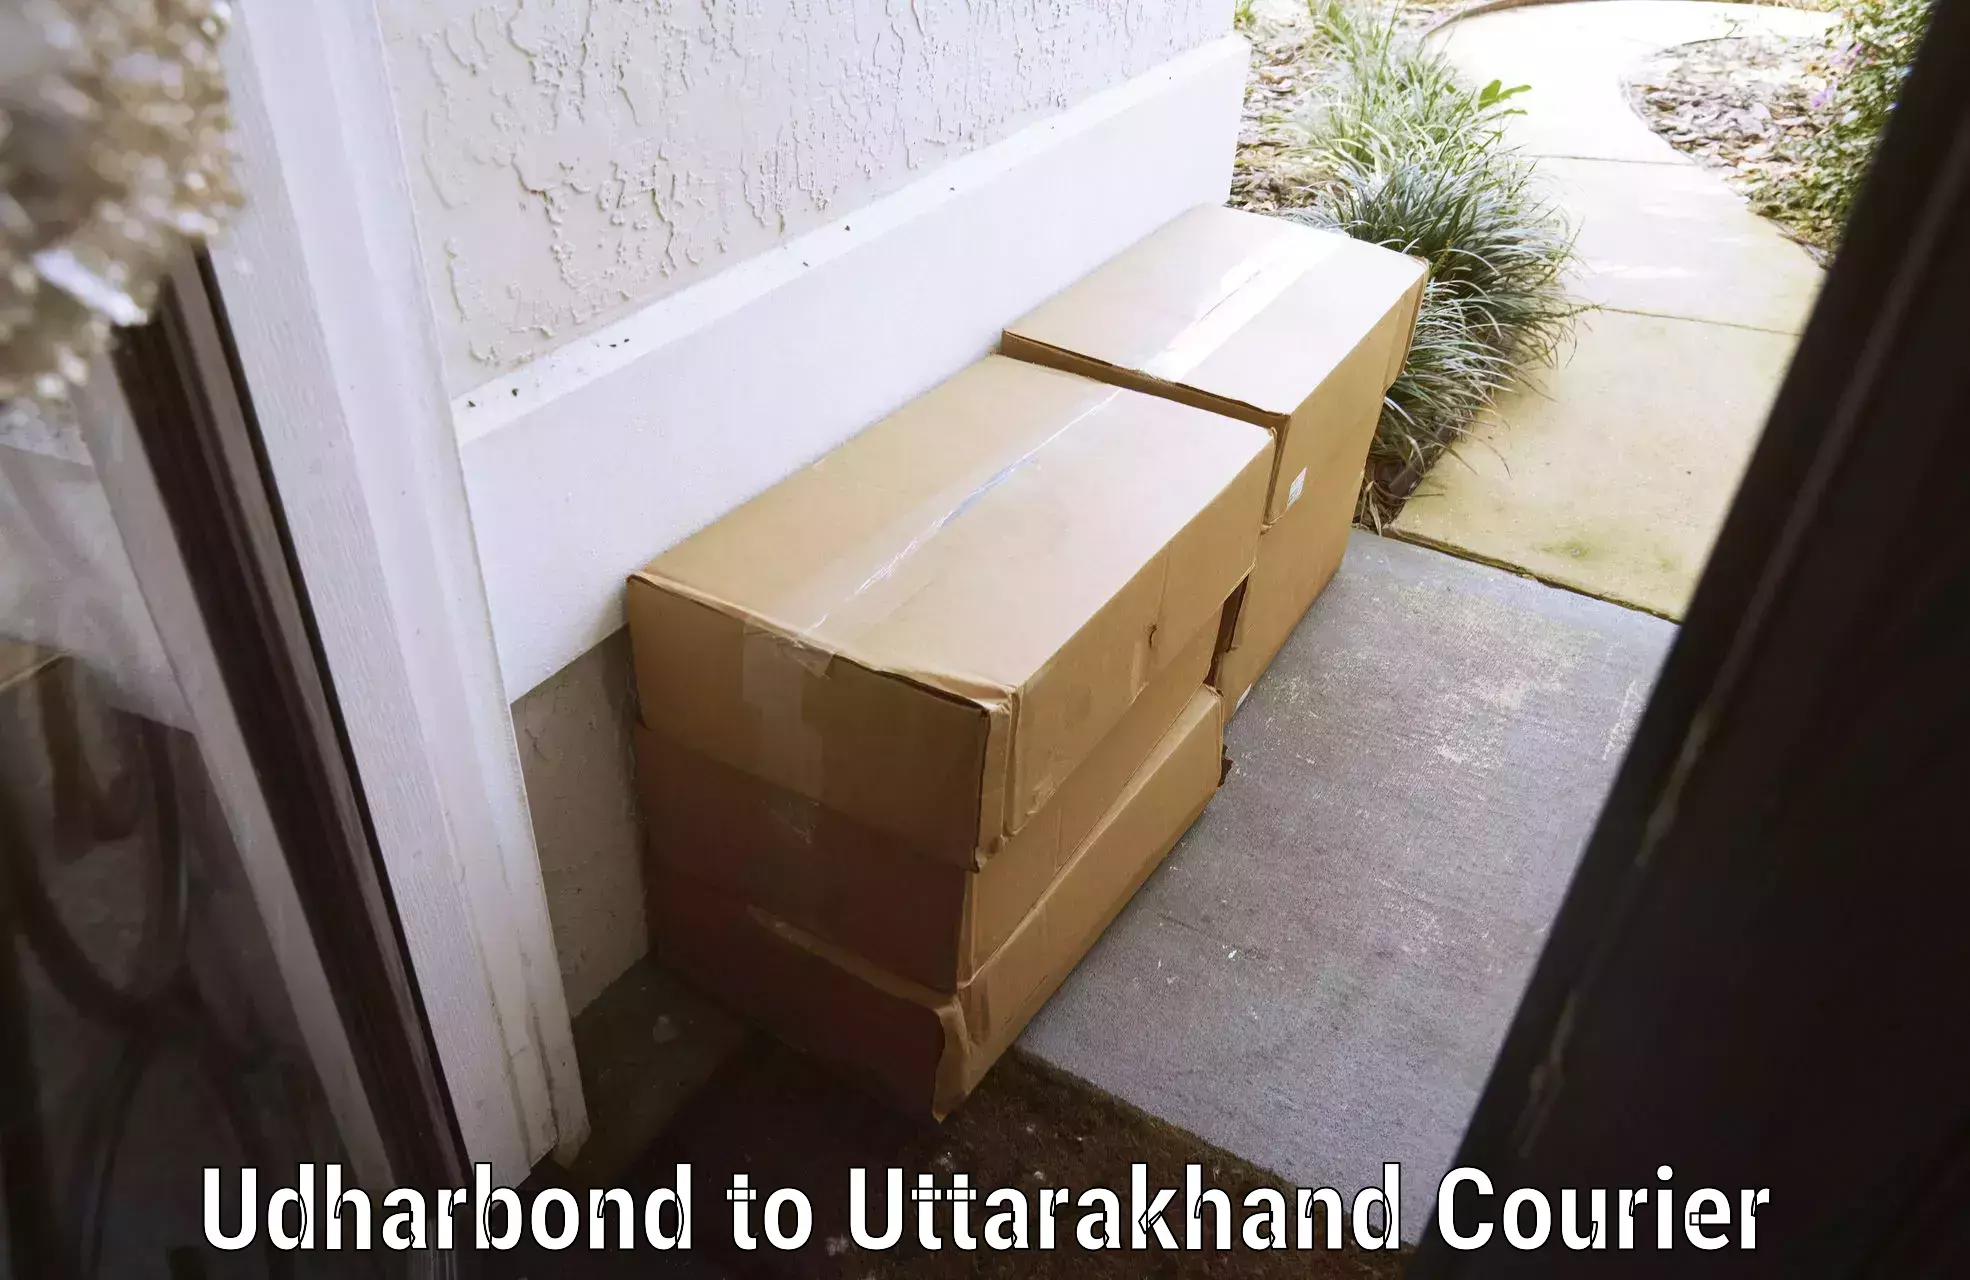 Baggage delivery technology Udharbond to Rudraprayag